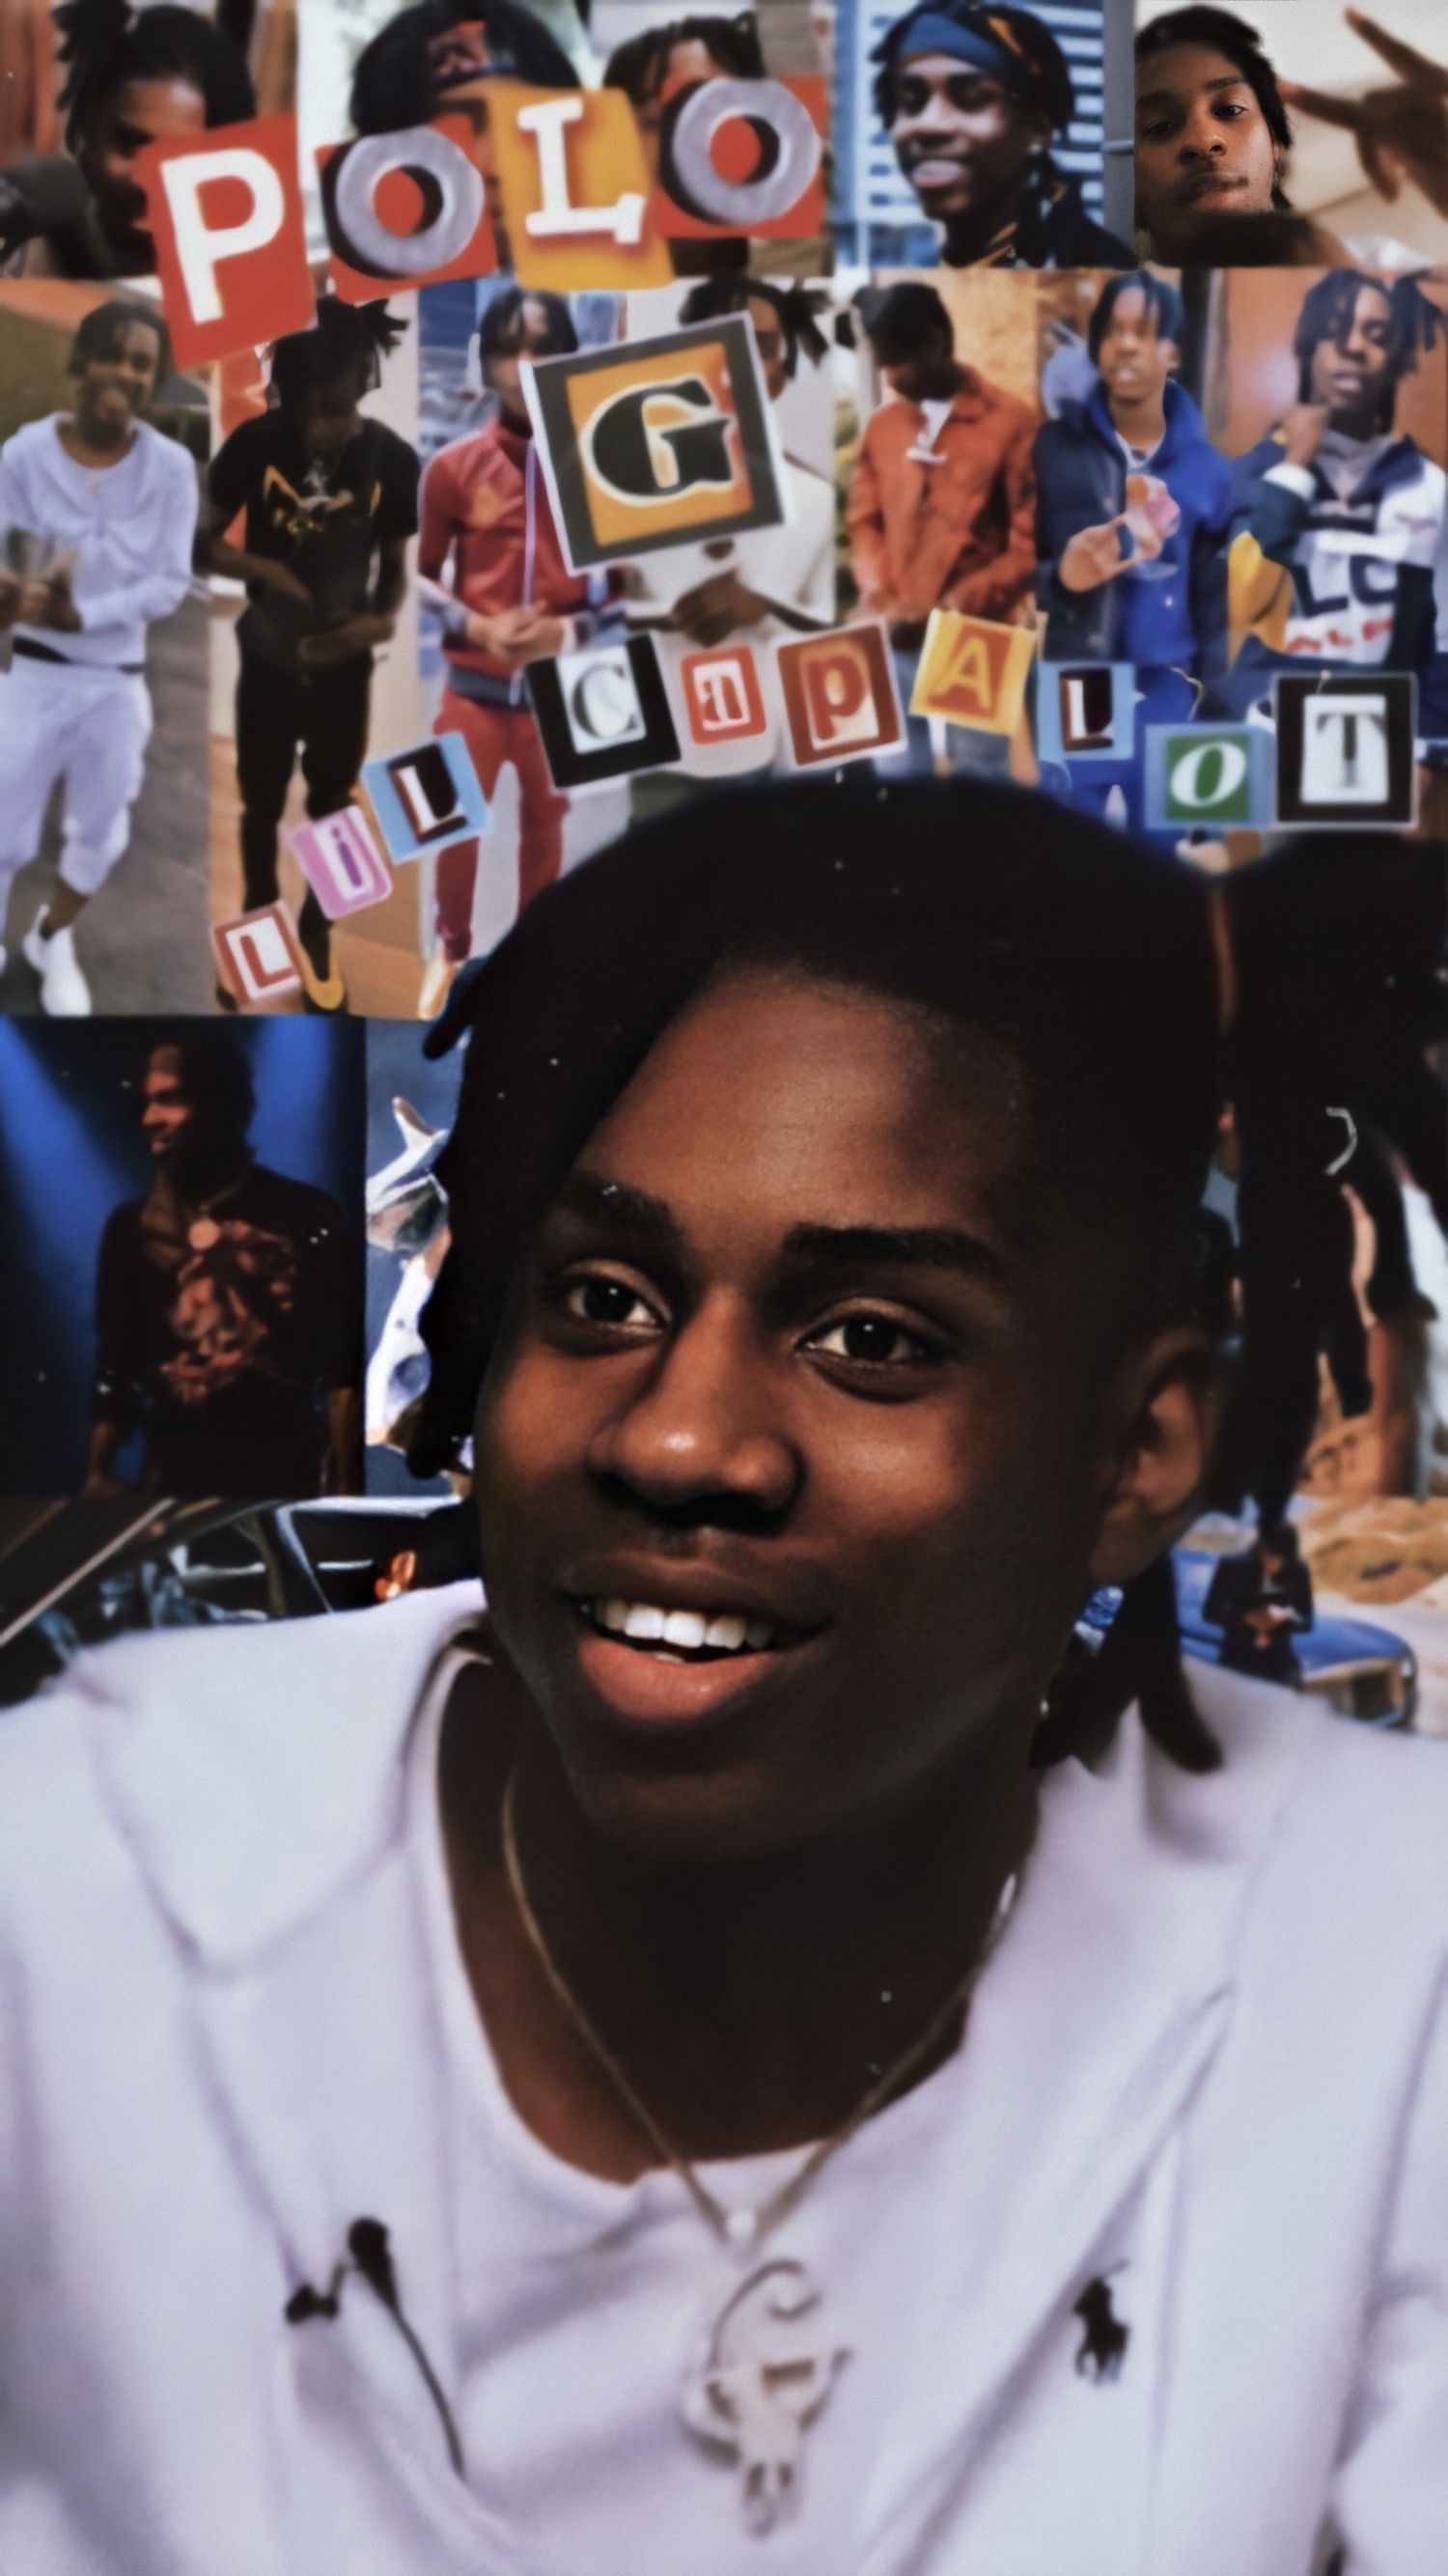 Polo G Wallpaper. Edgy wallpaper, Cute rappers, Iconic